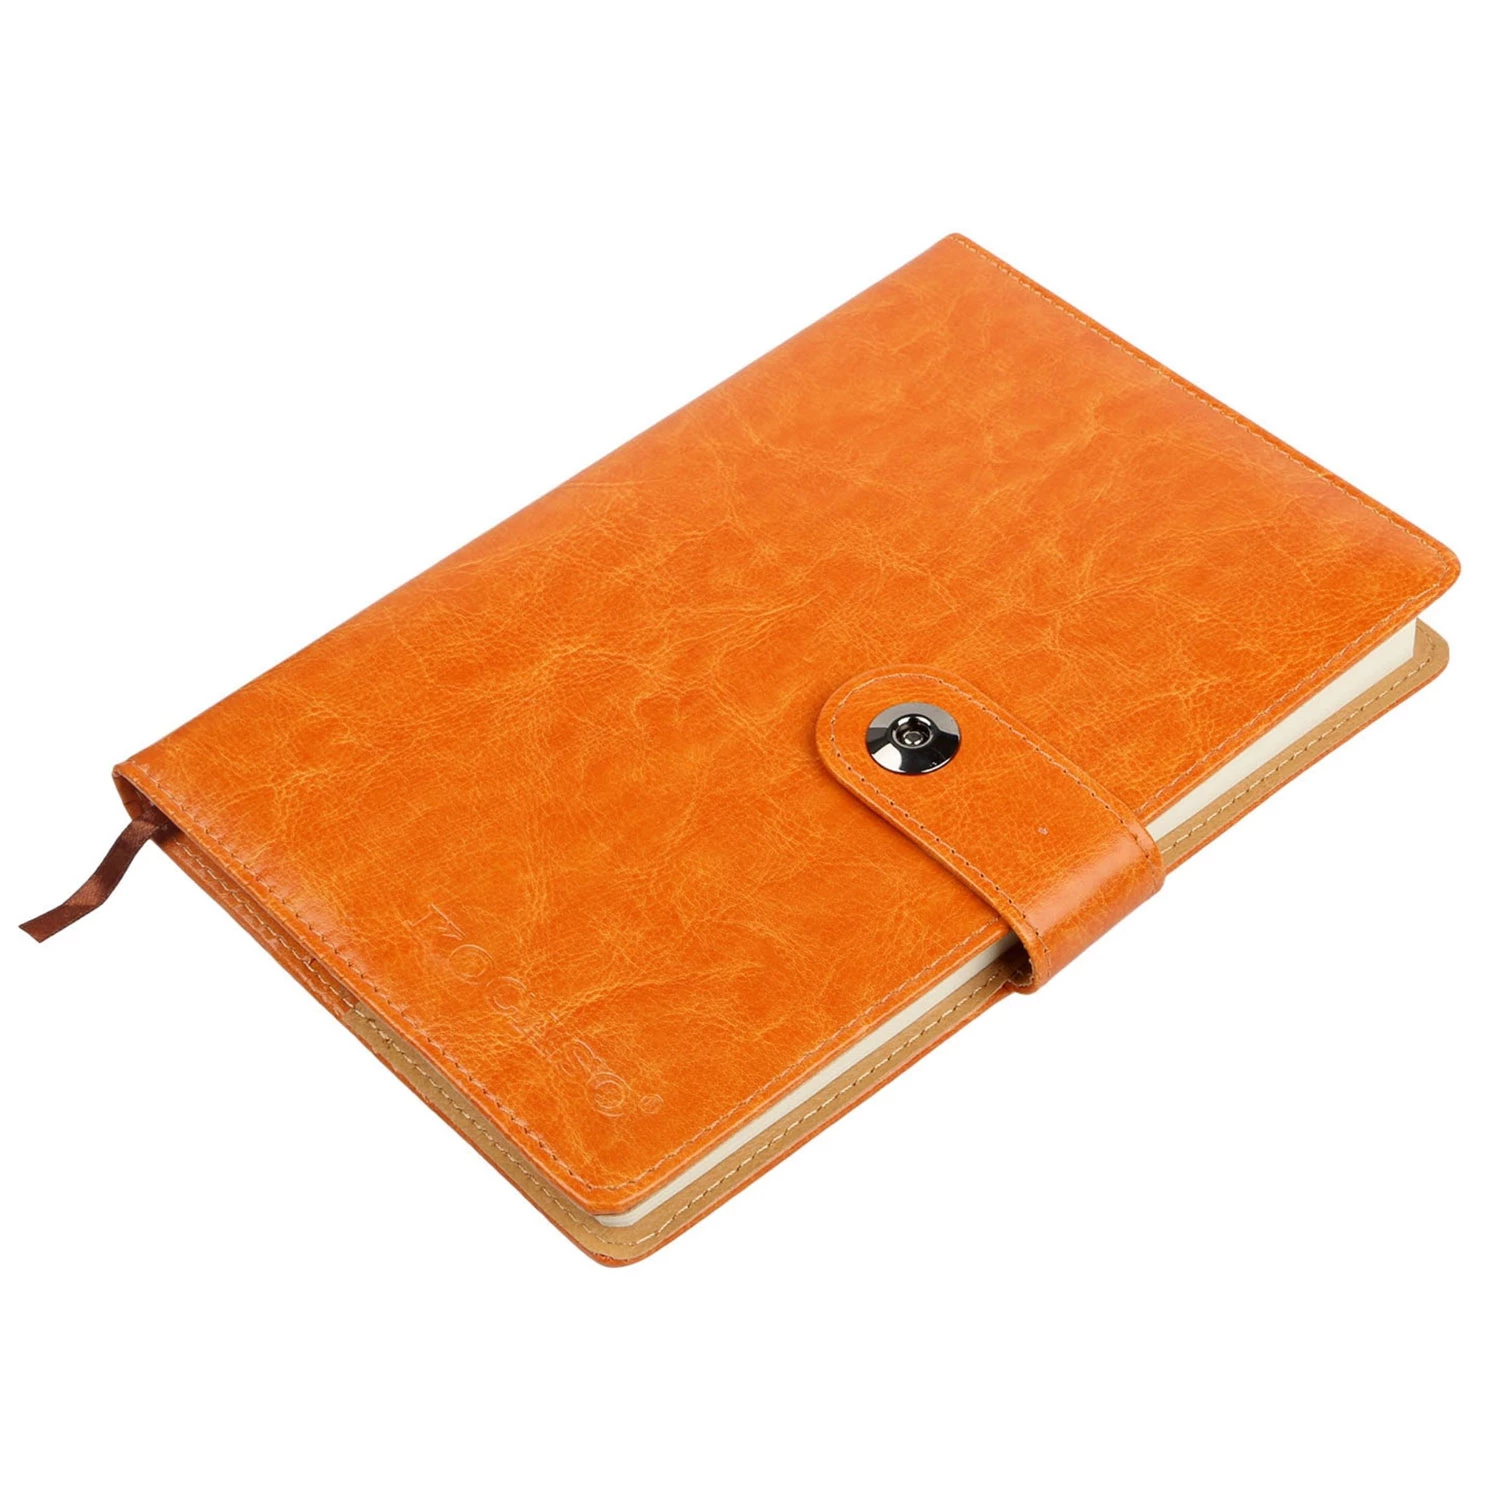 150 Pages PU Leather Cover Notebook with Calendar, World Map, and Silk Ribbon